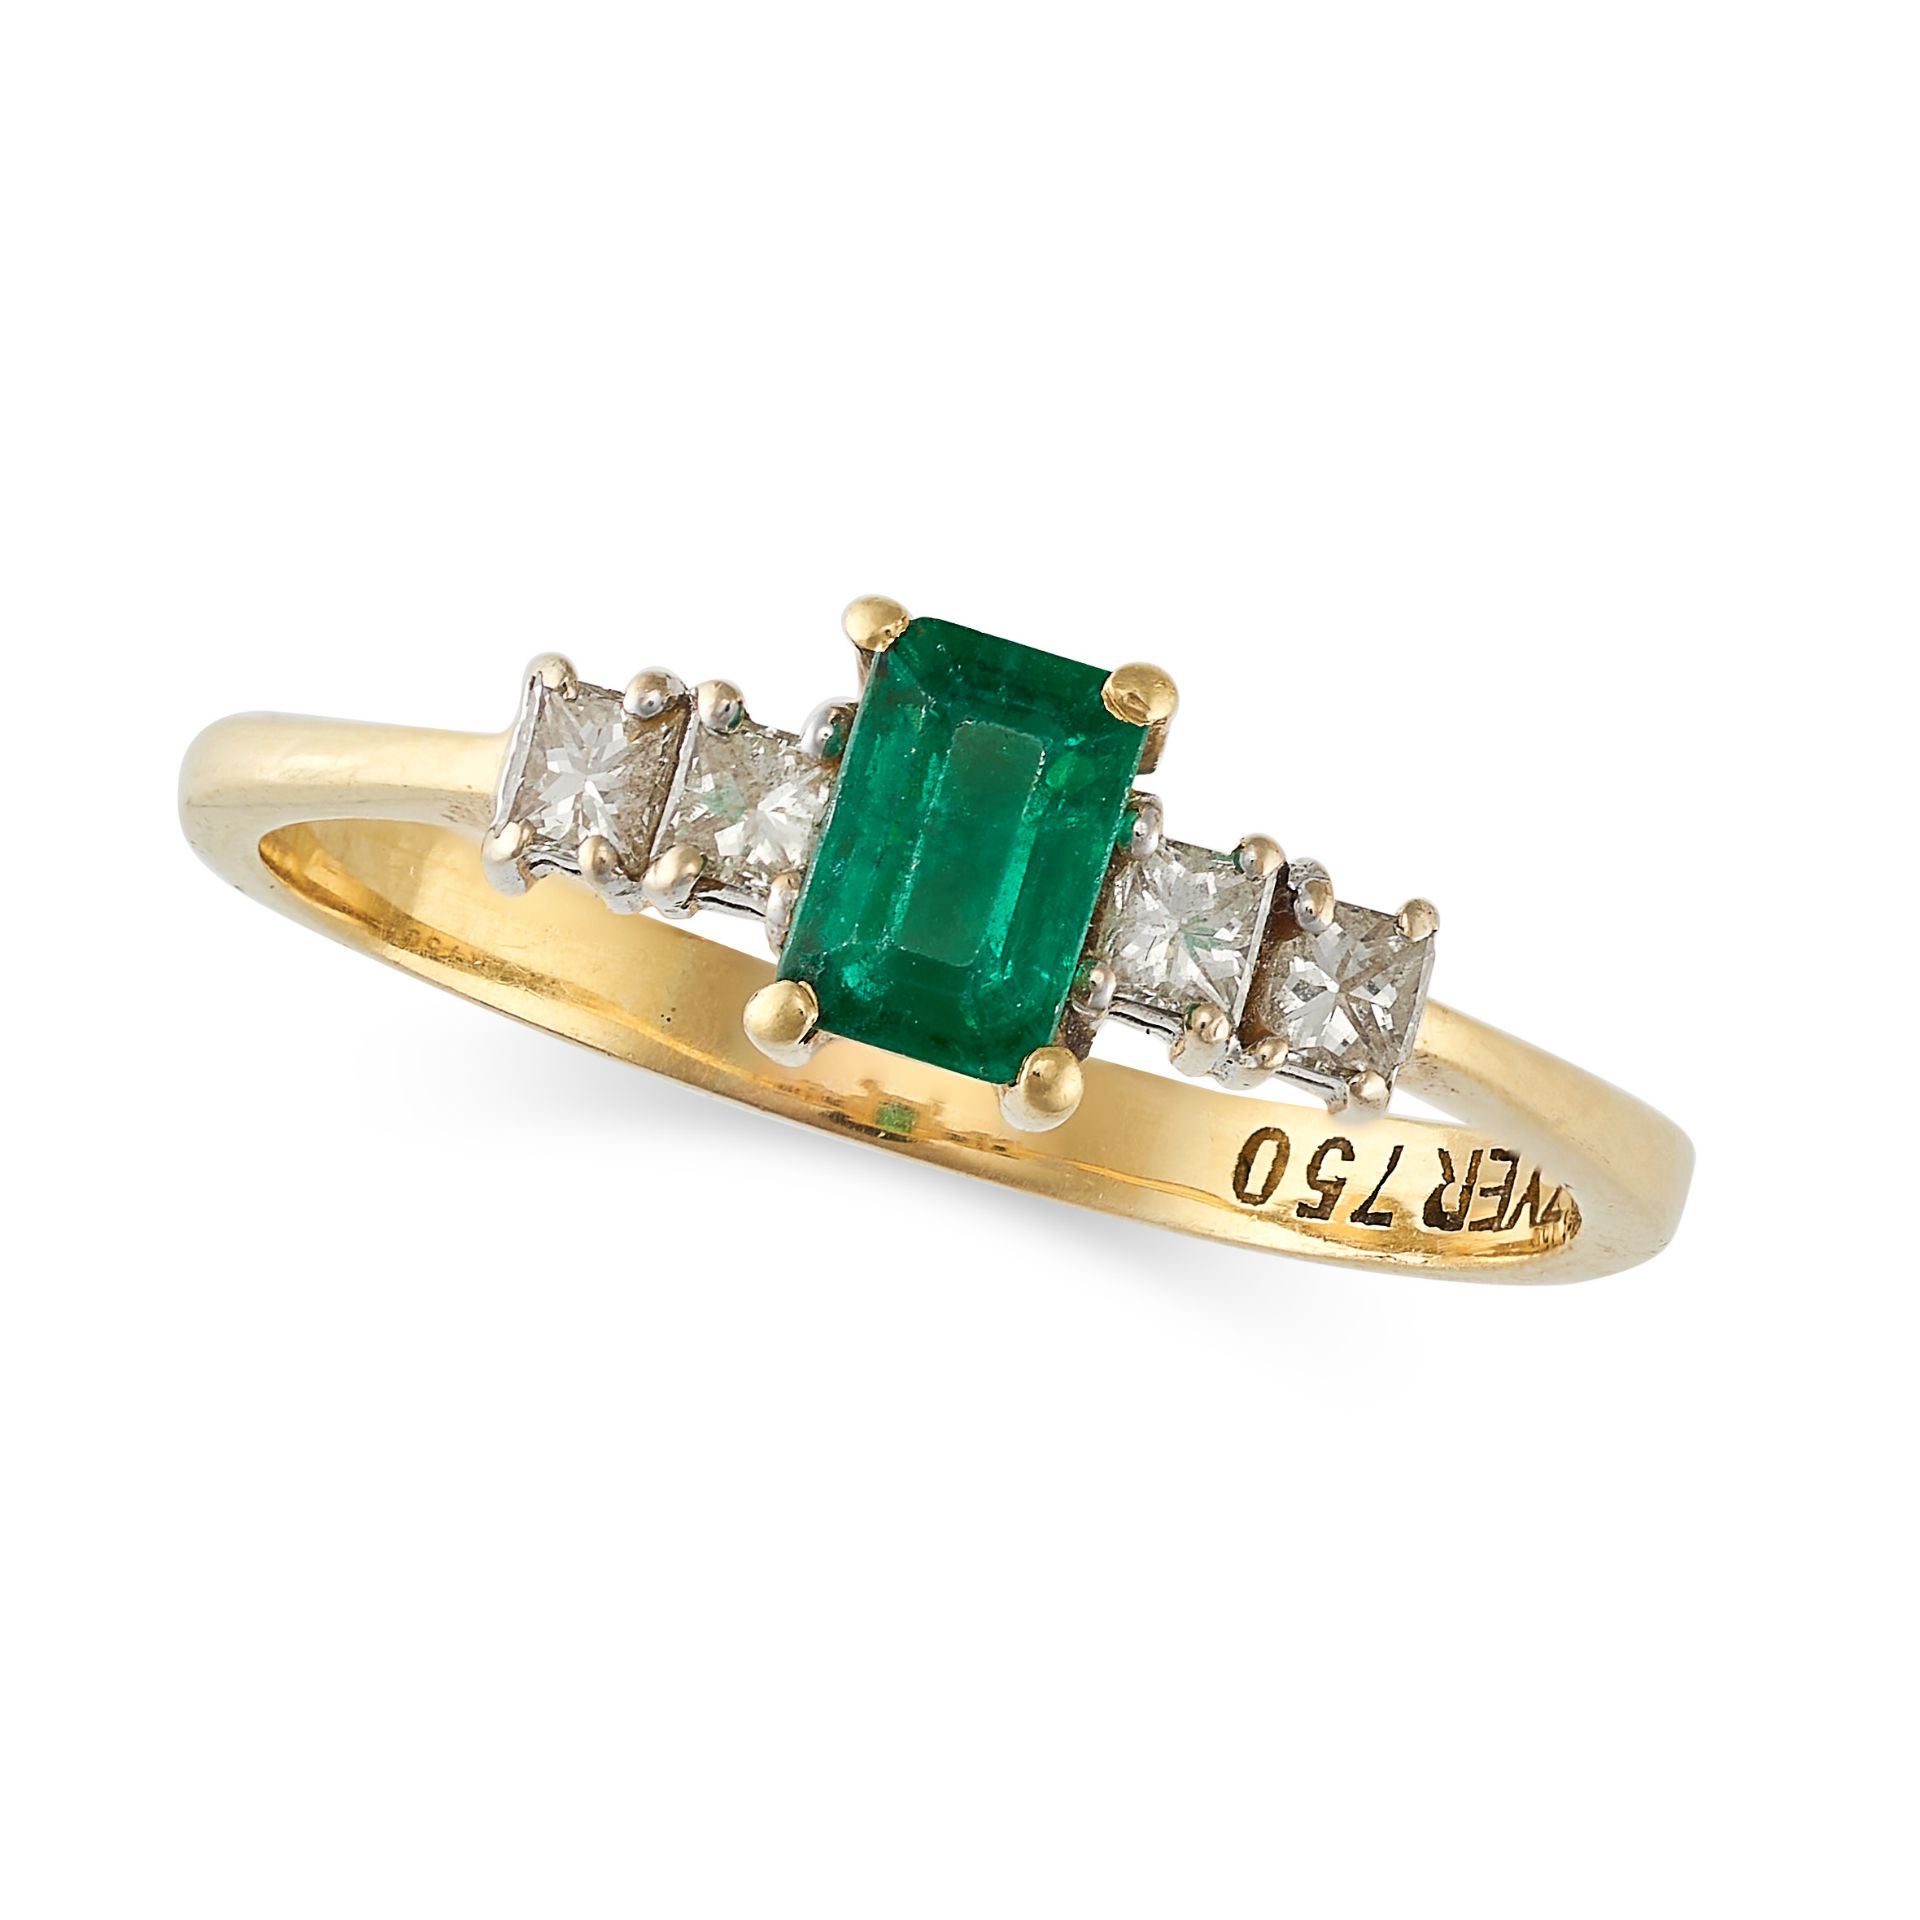 AN EMERALD AND DIAMOND RING in 18ct yellow gold, set with an octagonal cut emerald accented by pr...